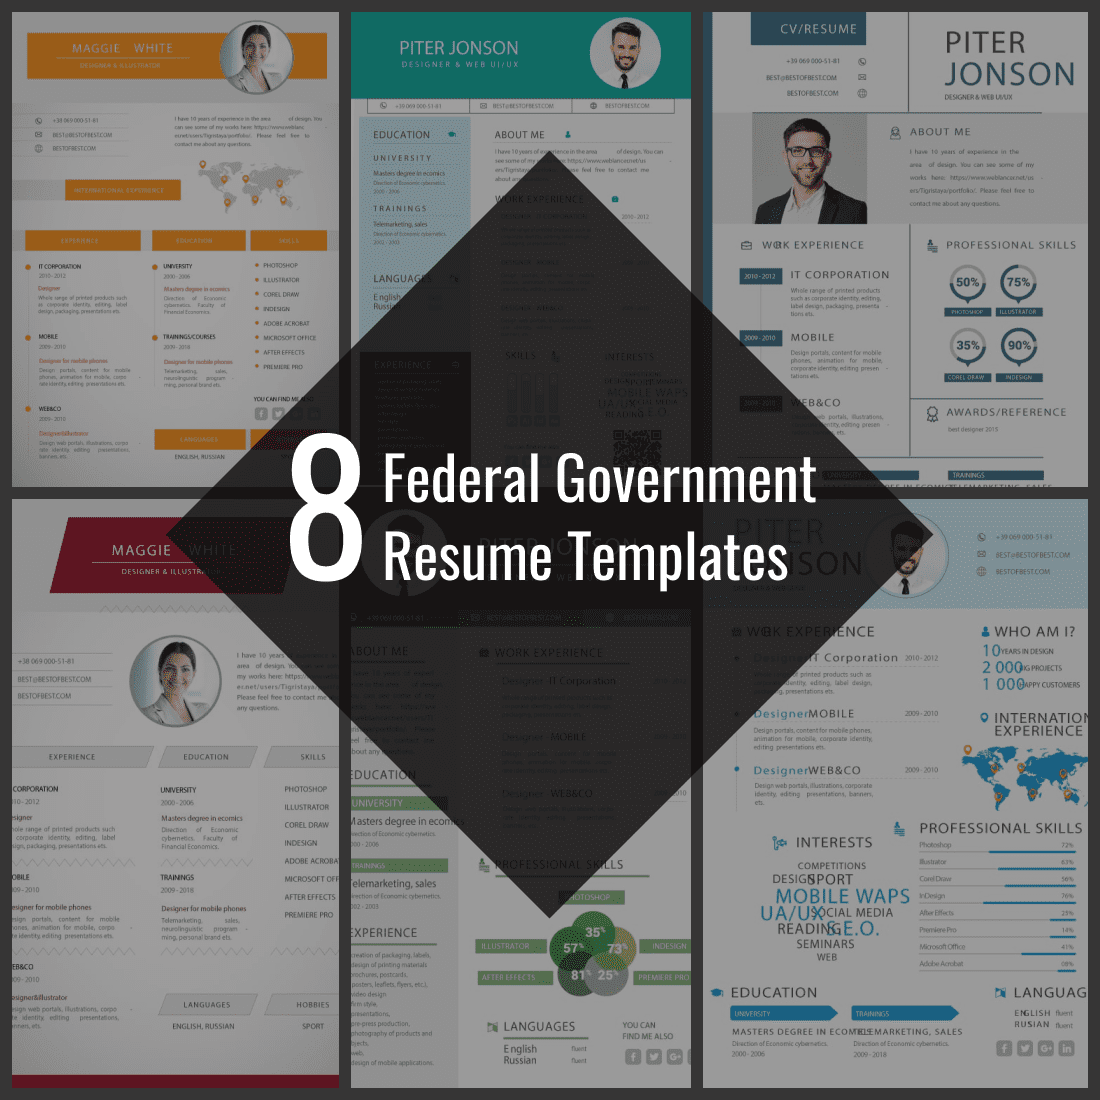 Federal Government Resume Templates